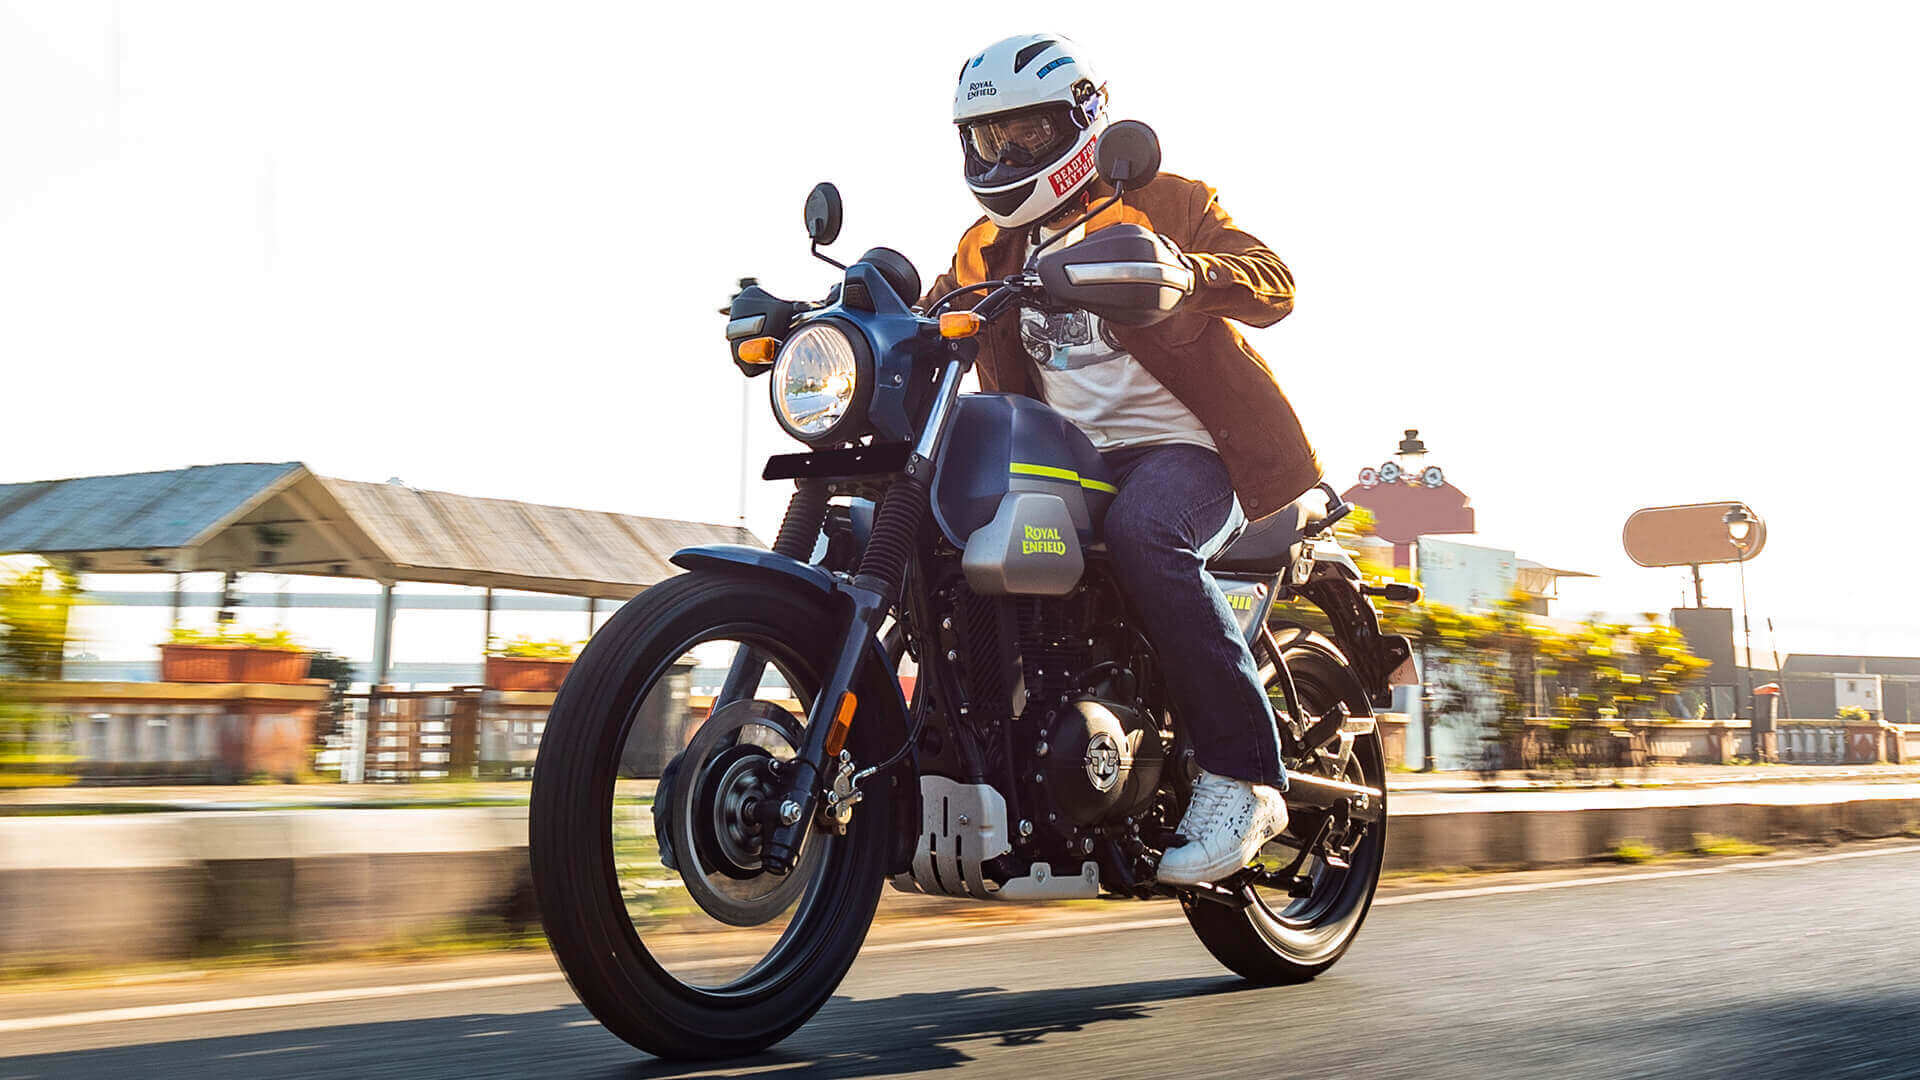 Scram 411 Bike Price, Specs, Colours & Images in India | Royal Enfield